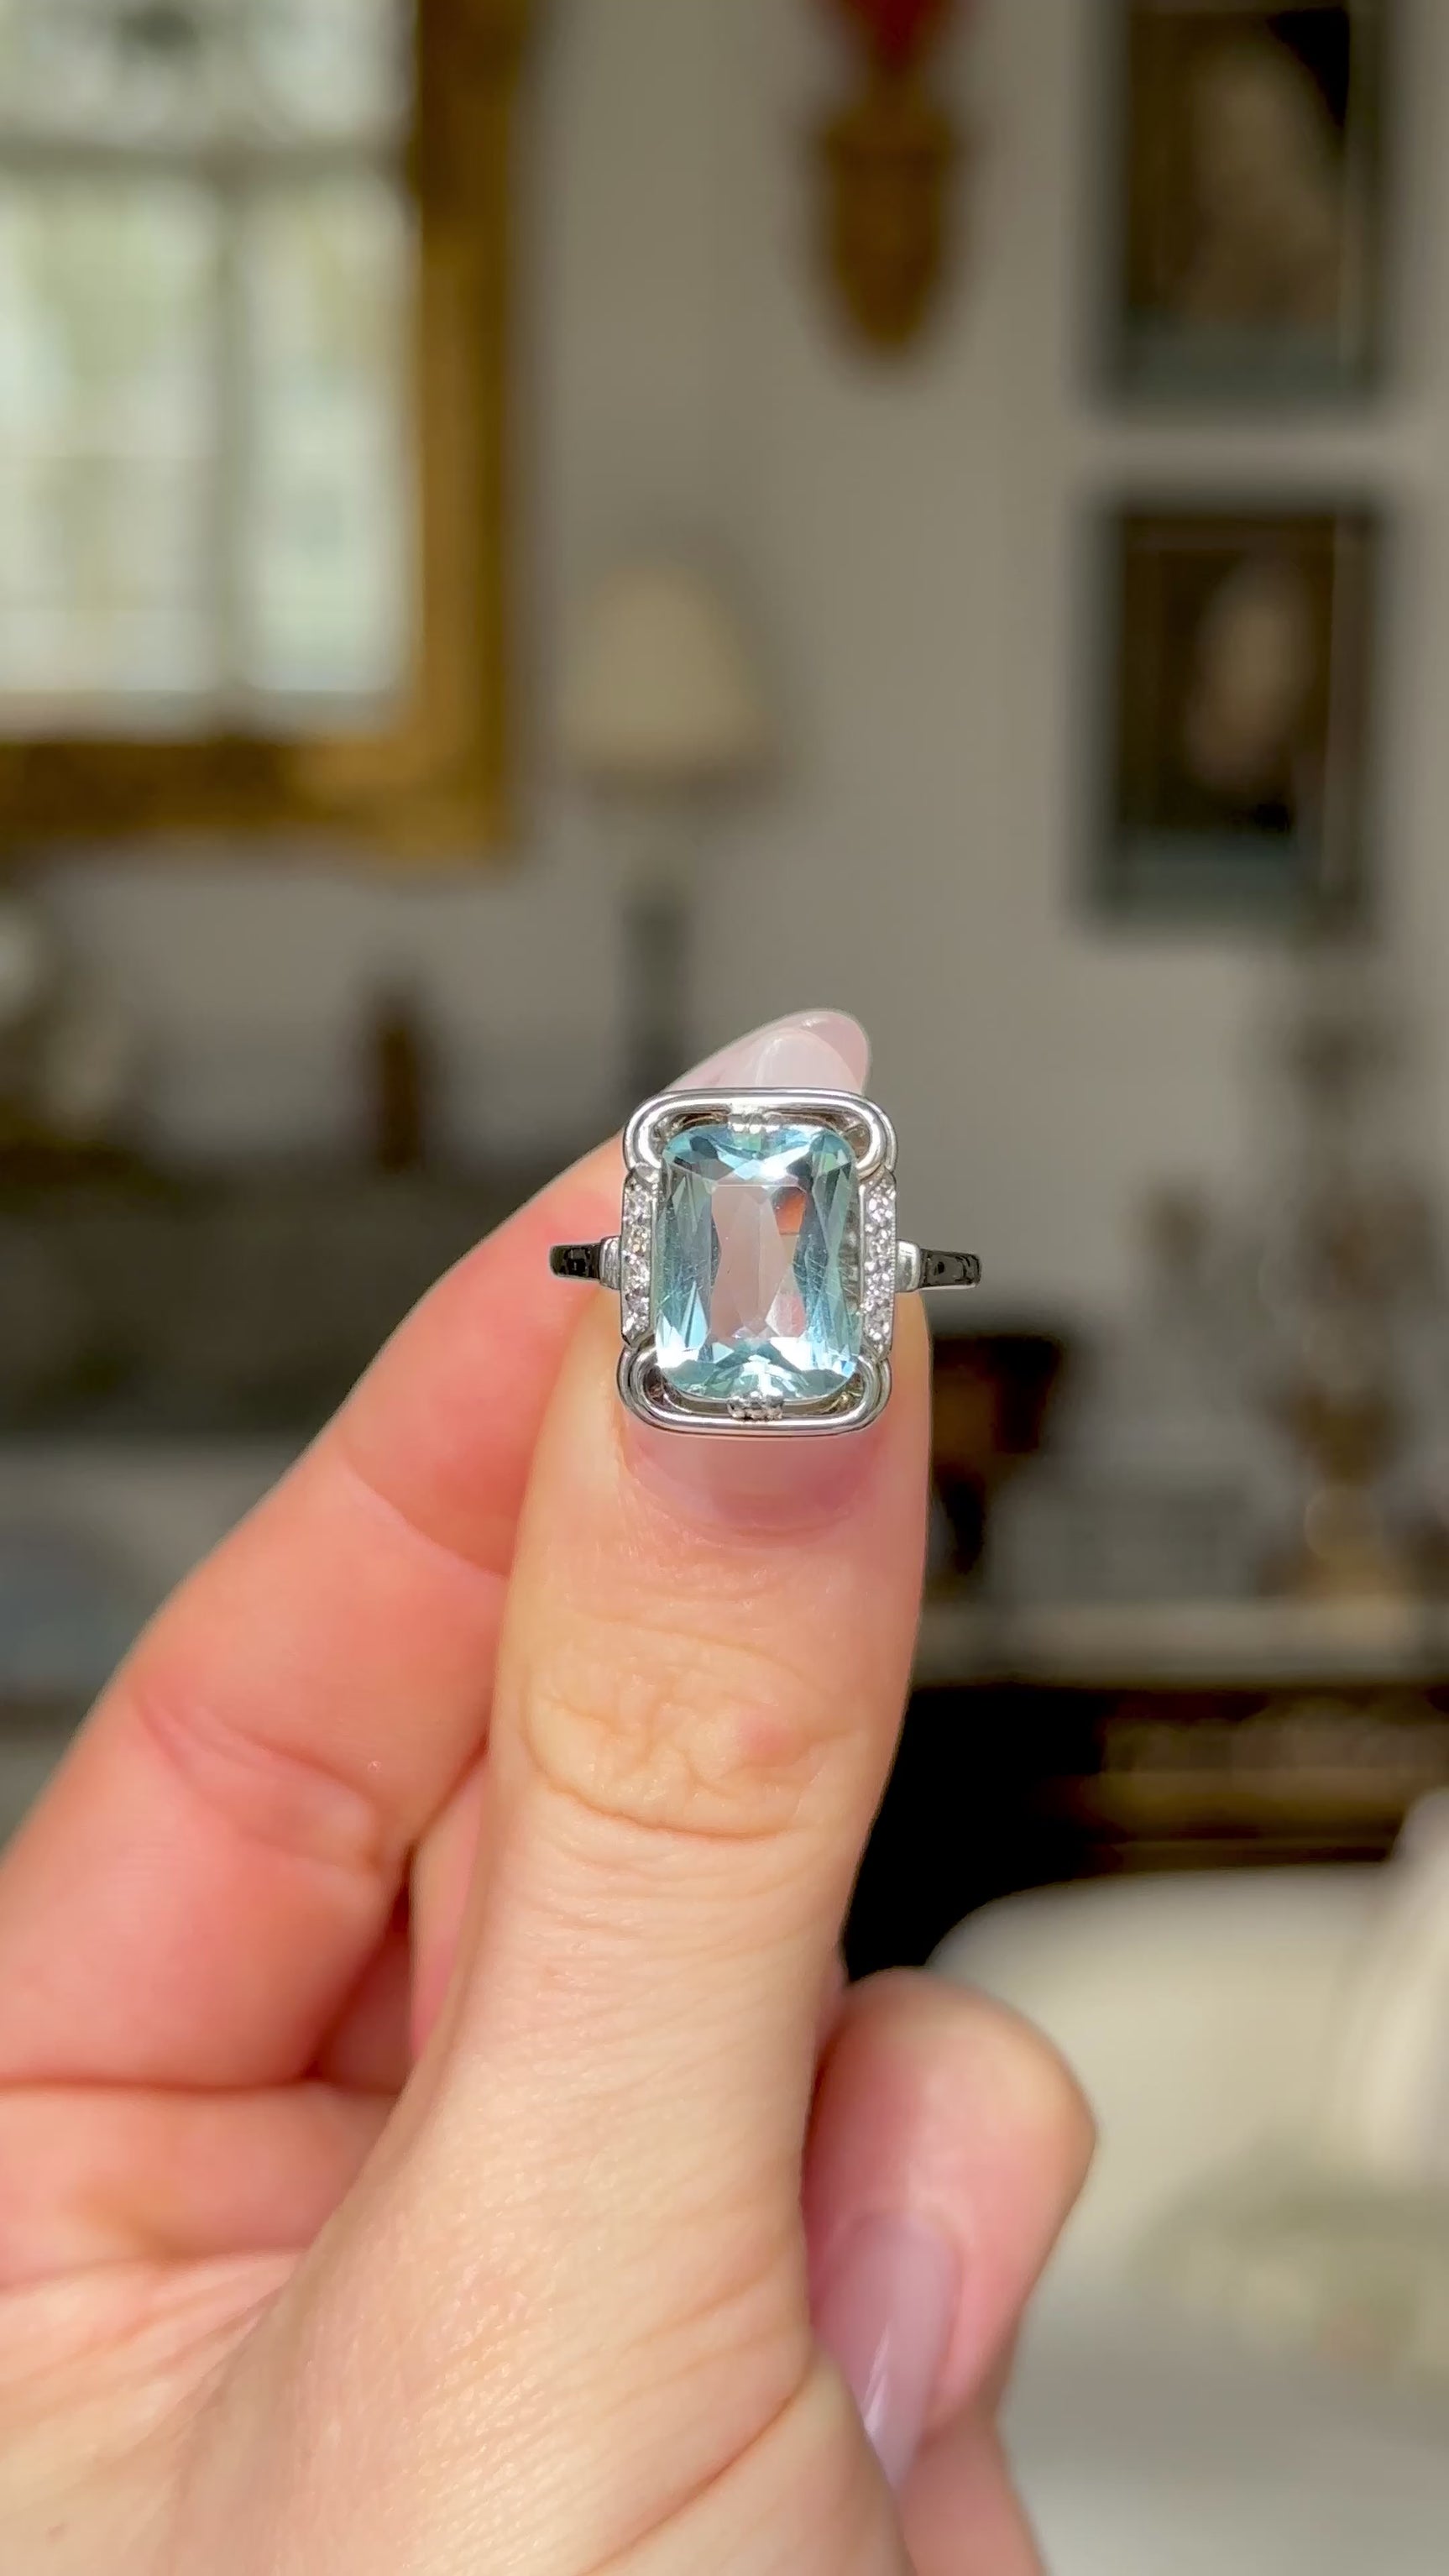 Vintage, Aquamarine and Diamond Ring, 18ct White Gold held in fingers and moved around to give perspective.